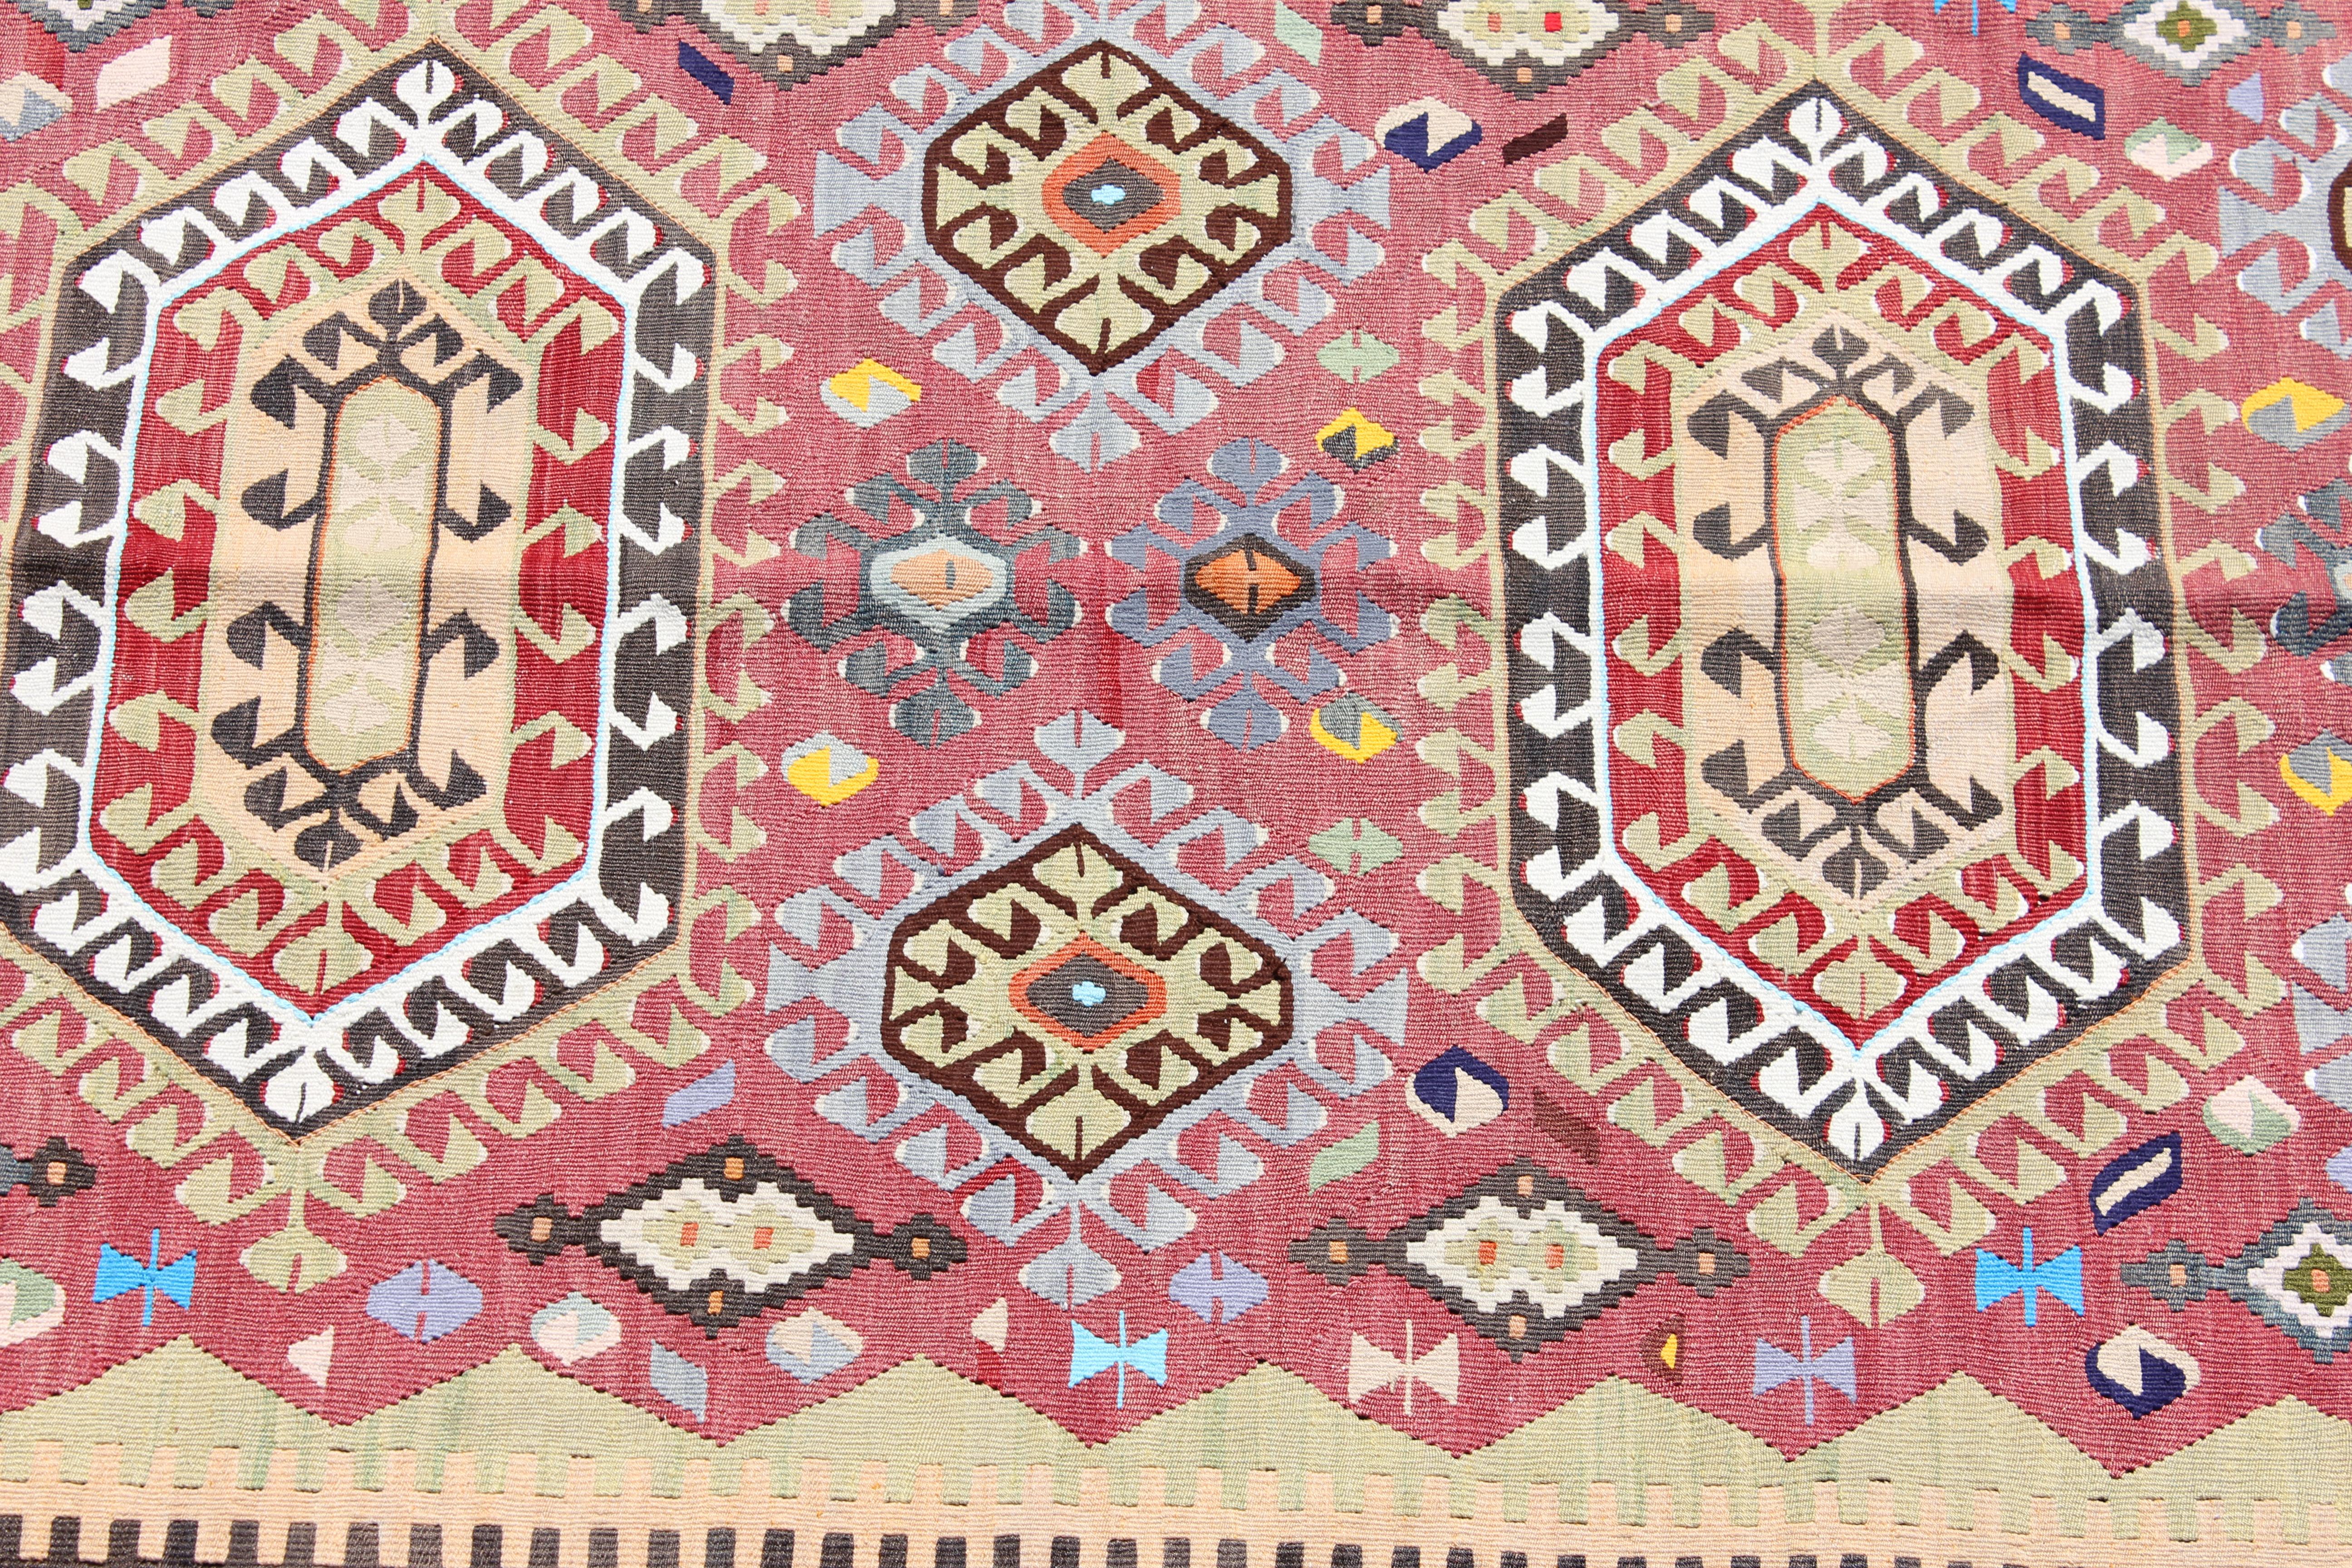 Wool and cotton handwoven tribal style Turkish Kilim. The rug has orange, blue, and red tones. It is from the Denizli region and is about 35 years old.